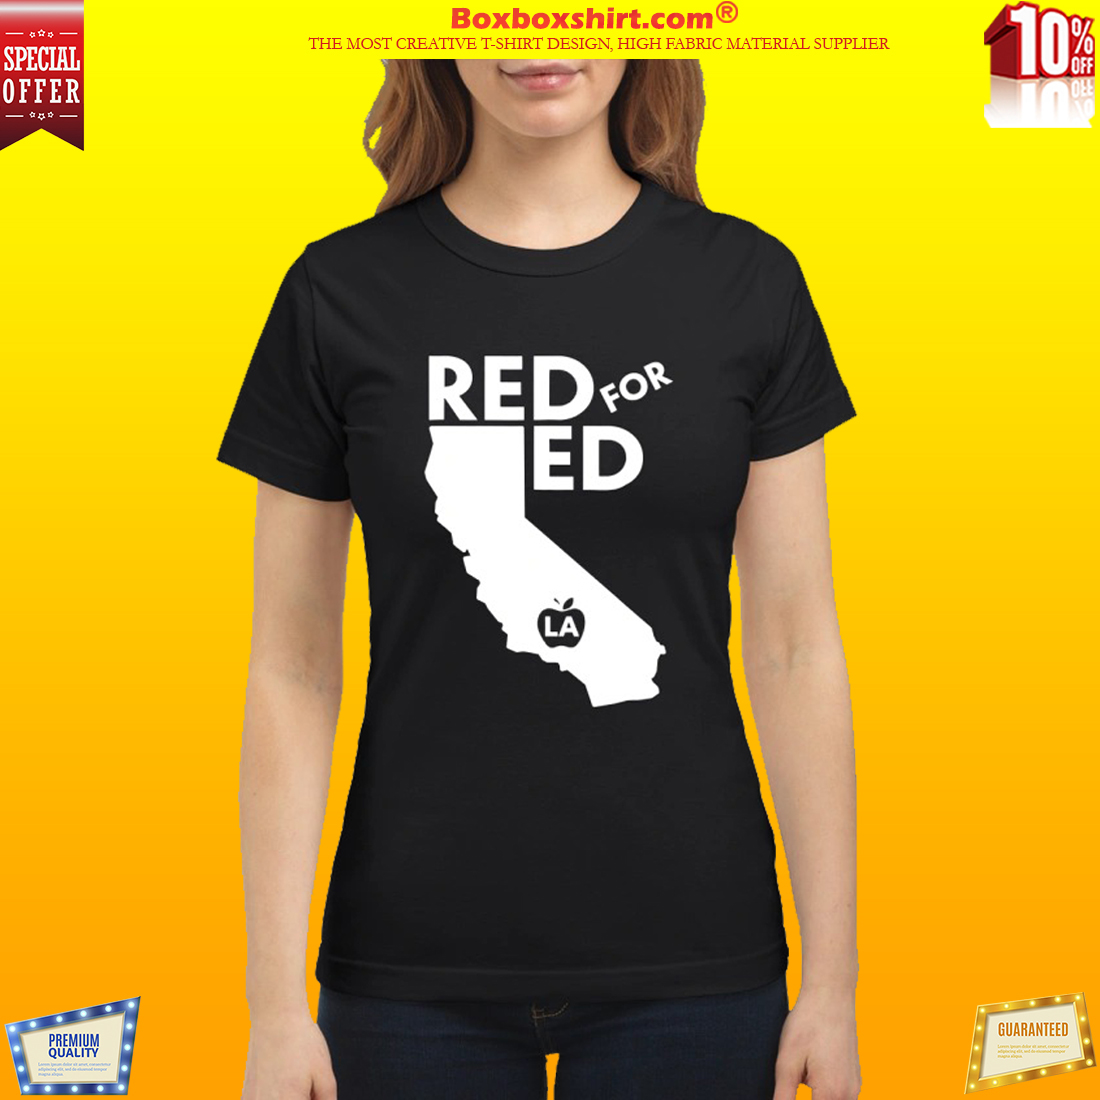 Red for ed California classic shirt